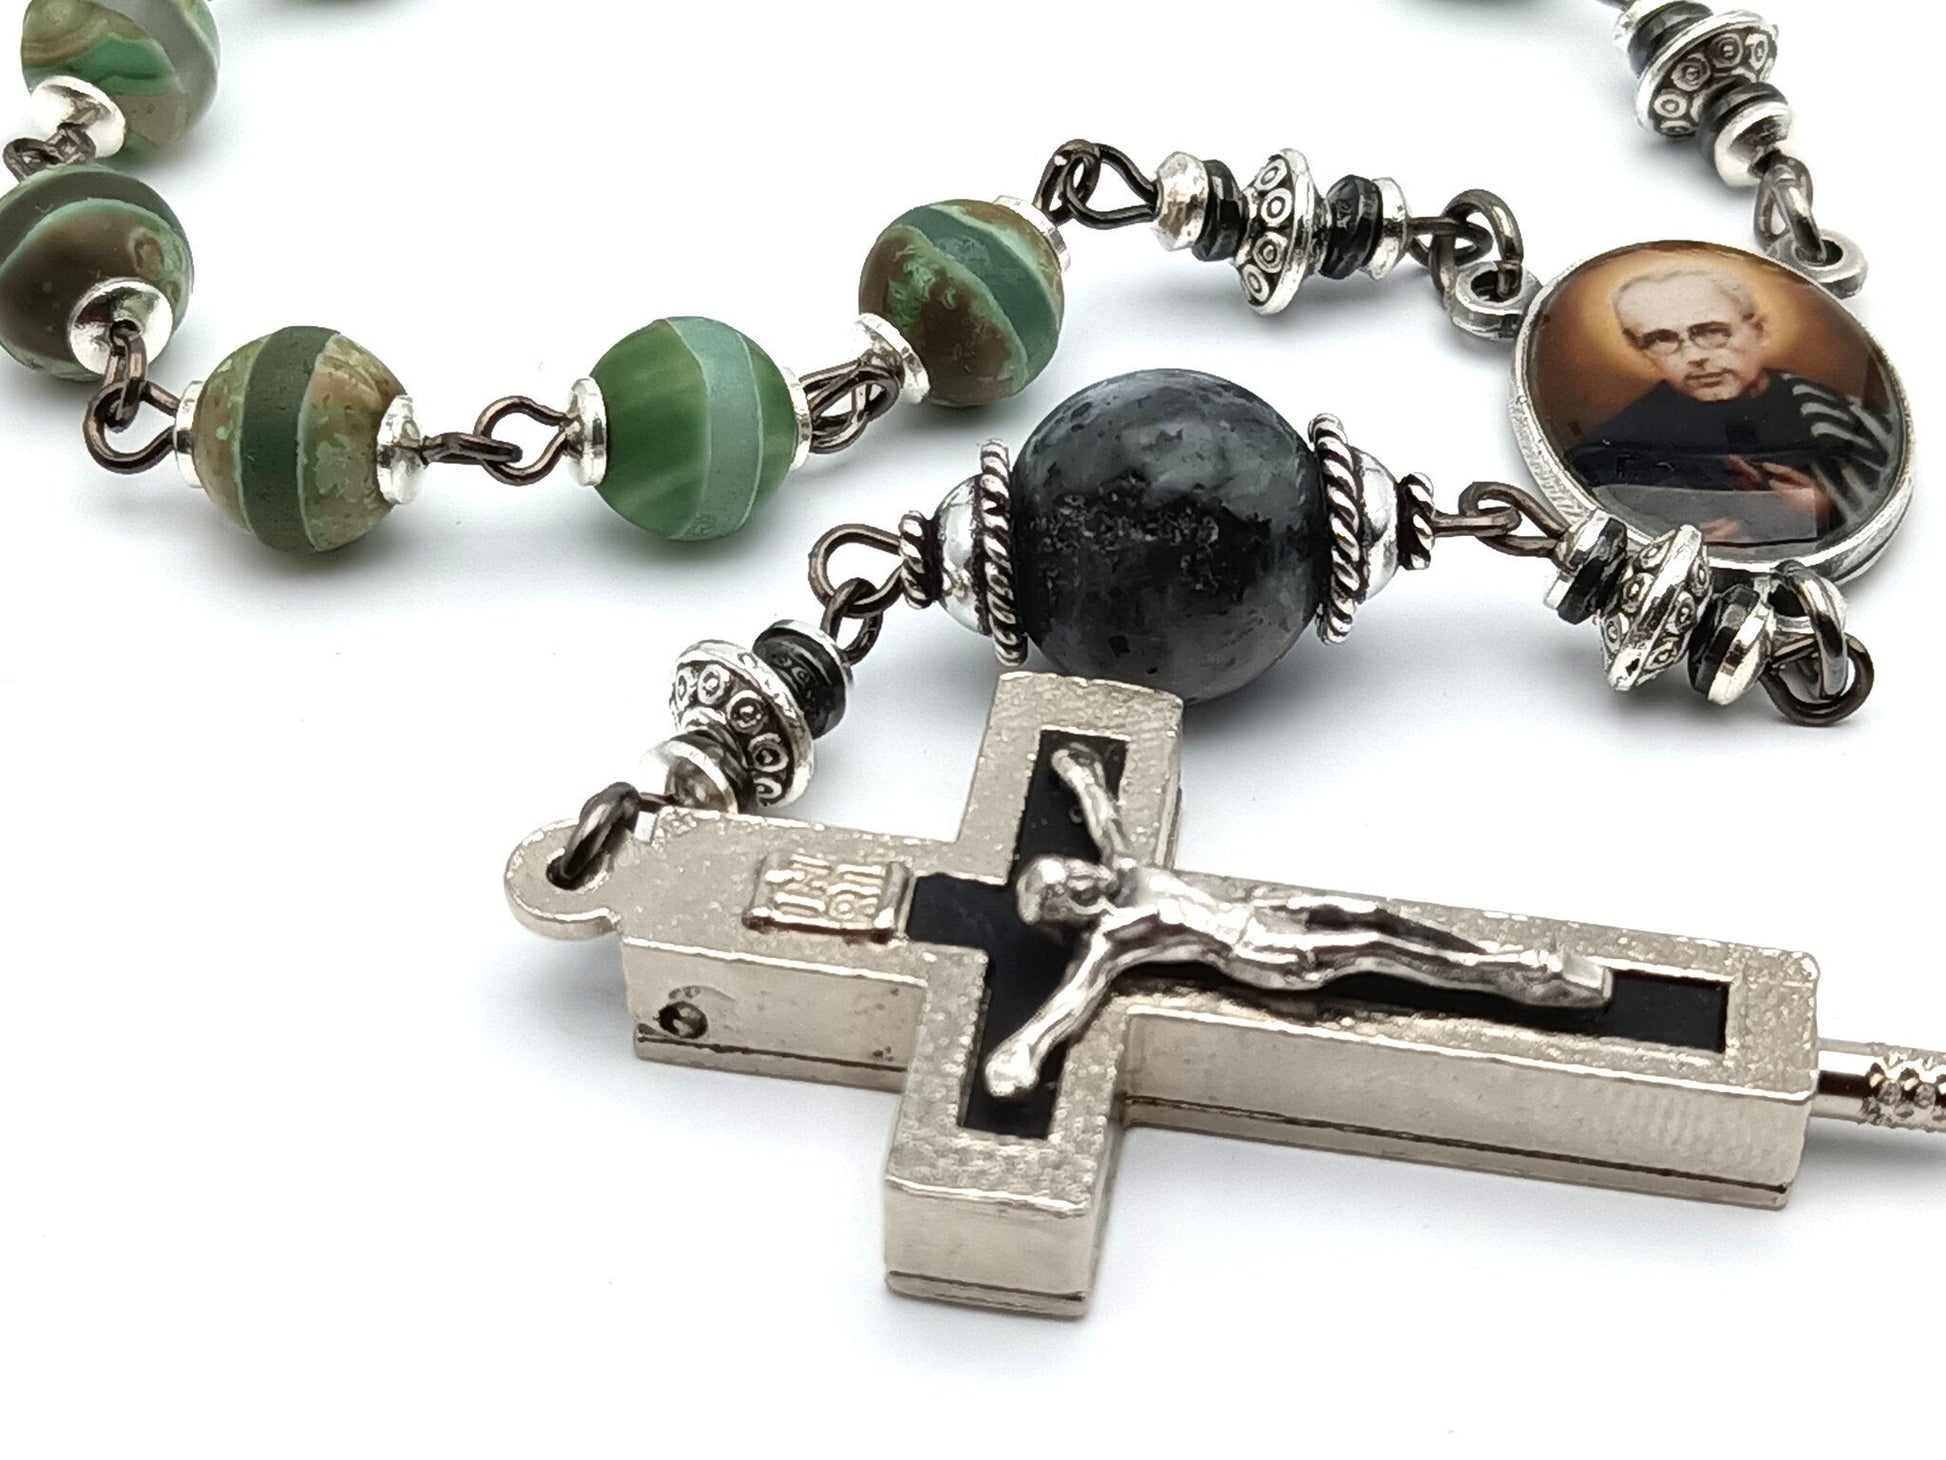 Saint Maximillian Kolbe unique rosary beads single decade with gemstone beads, silver and black relic holder crucifix and picture centre medal.